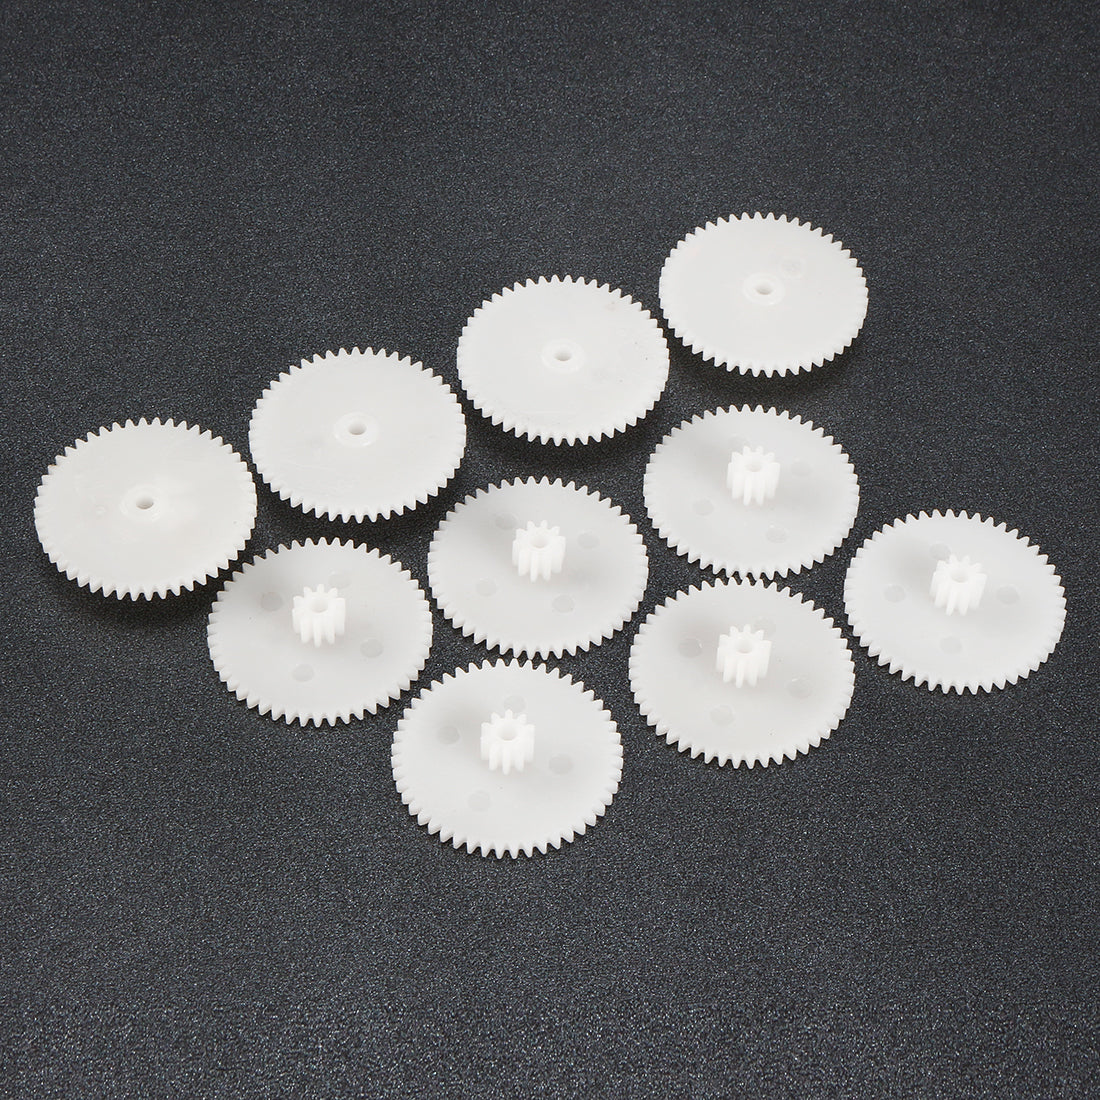 uxcell Uxcell 10Pcs 48102B Plastic Gear Accessories with 48 Teeth for DIY Car Robot Motor